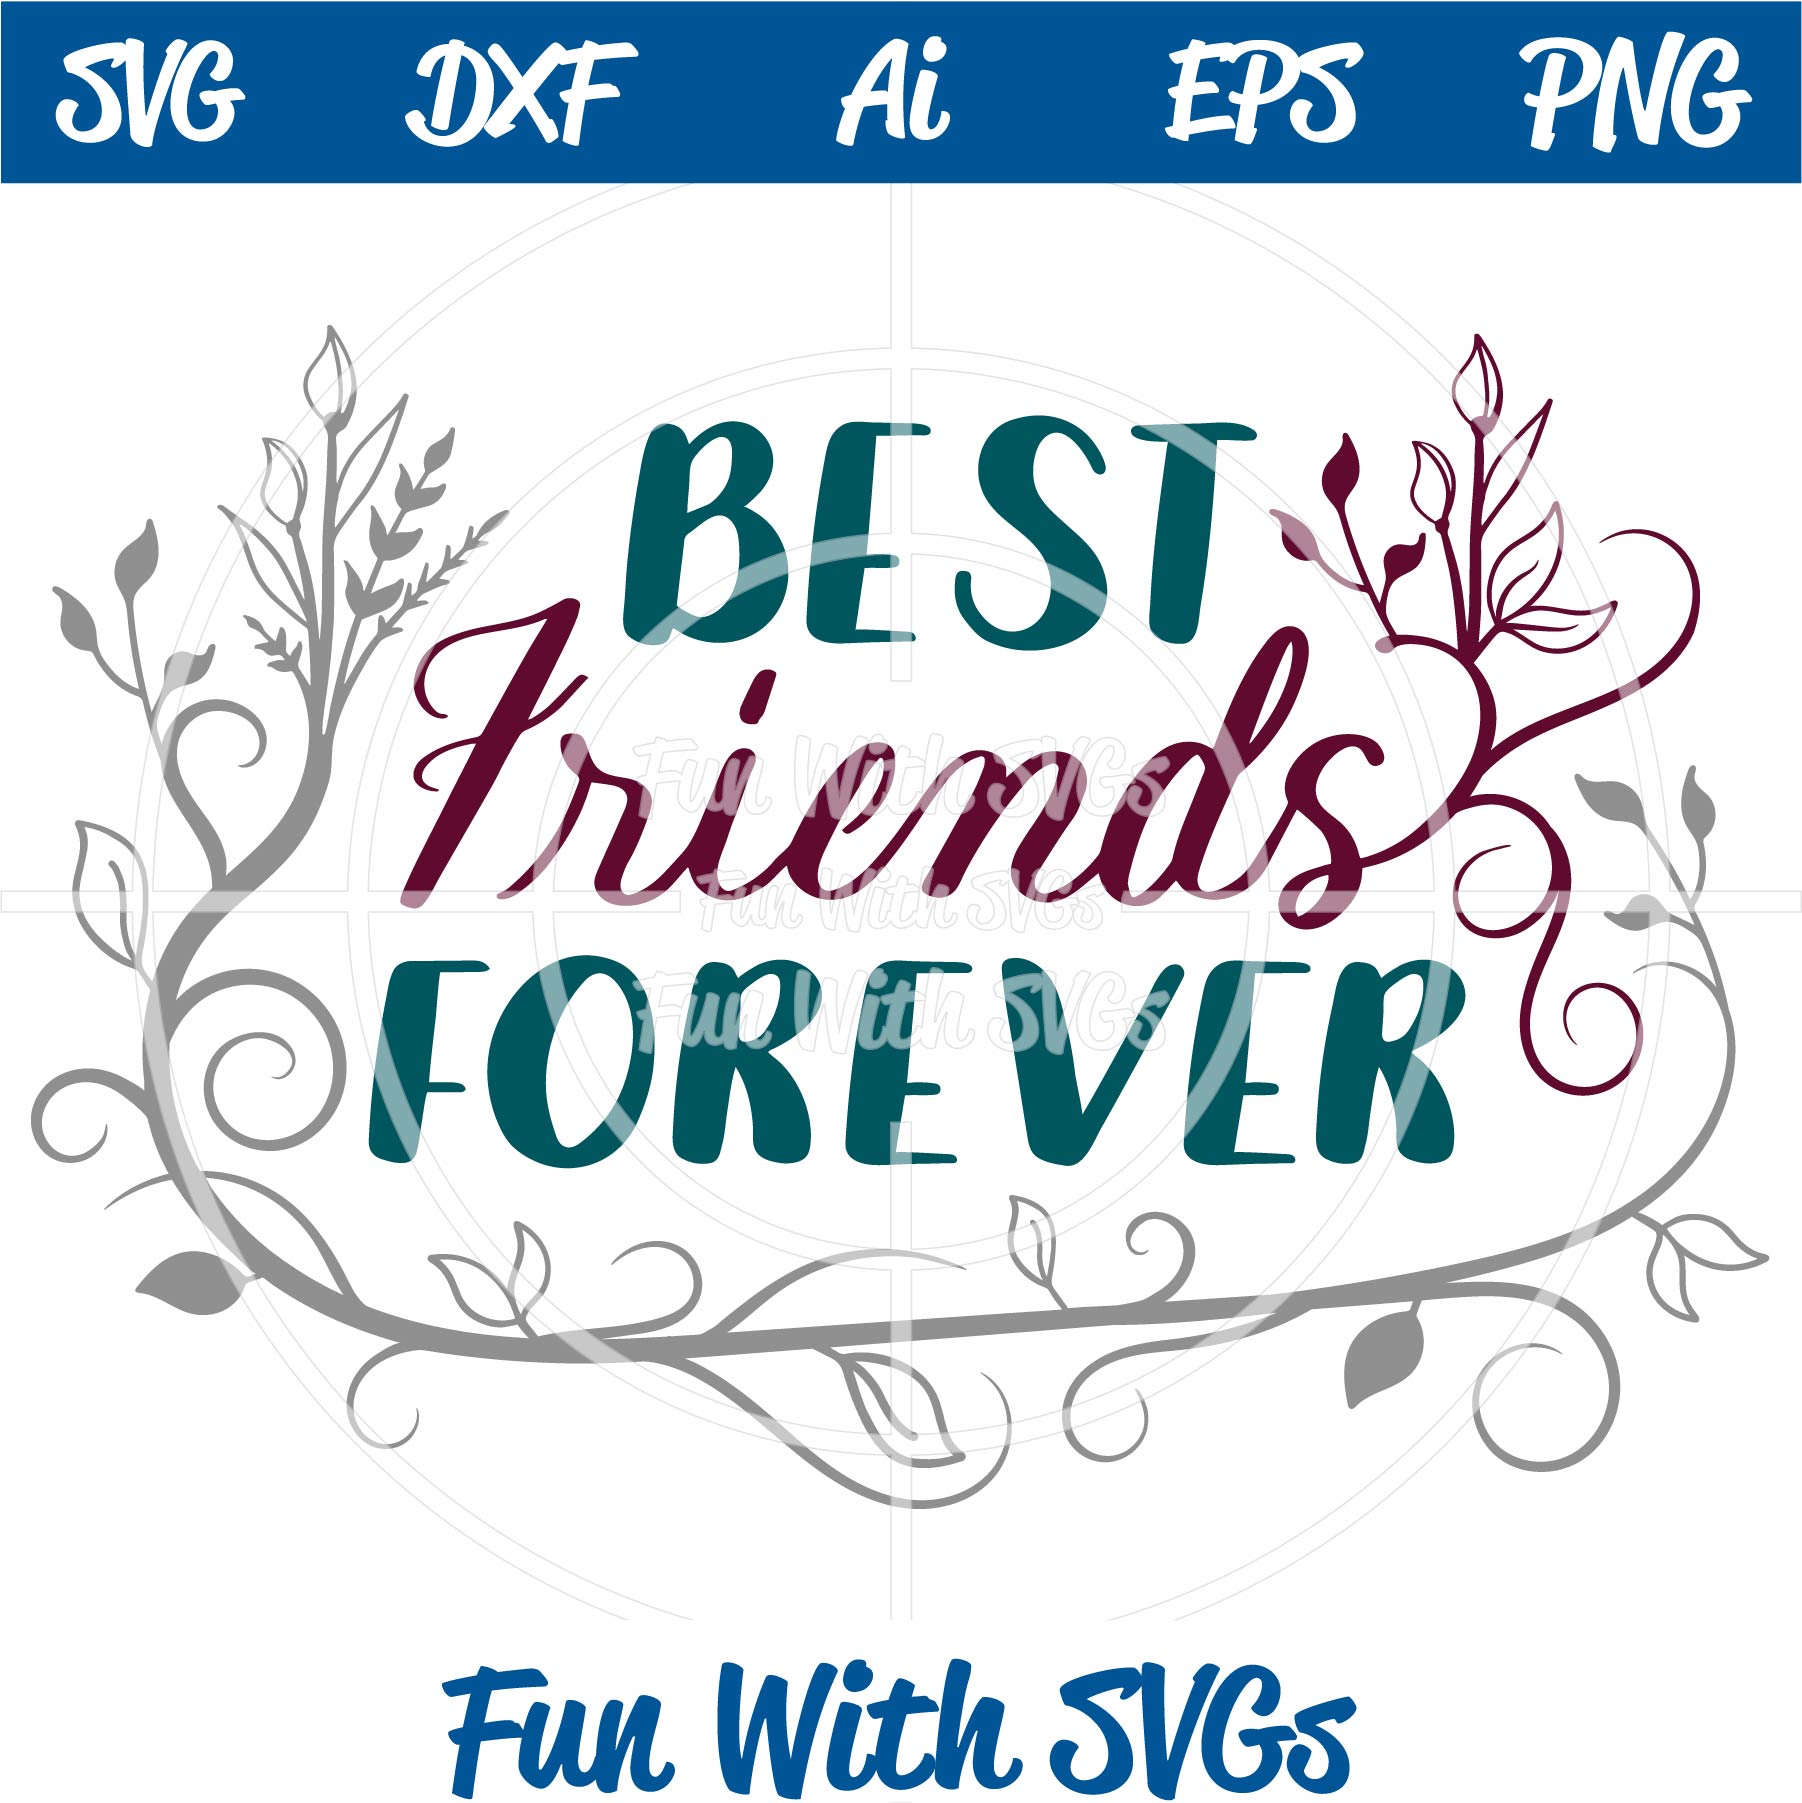 Best Friends Forever SVG File ~ for that special someone Fun With SVGs